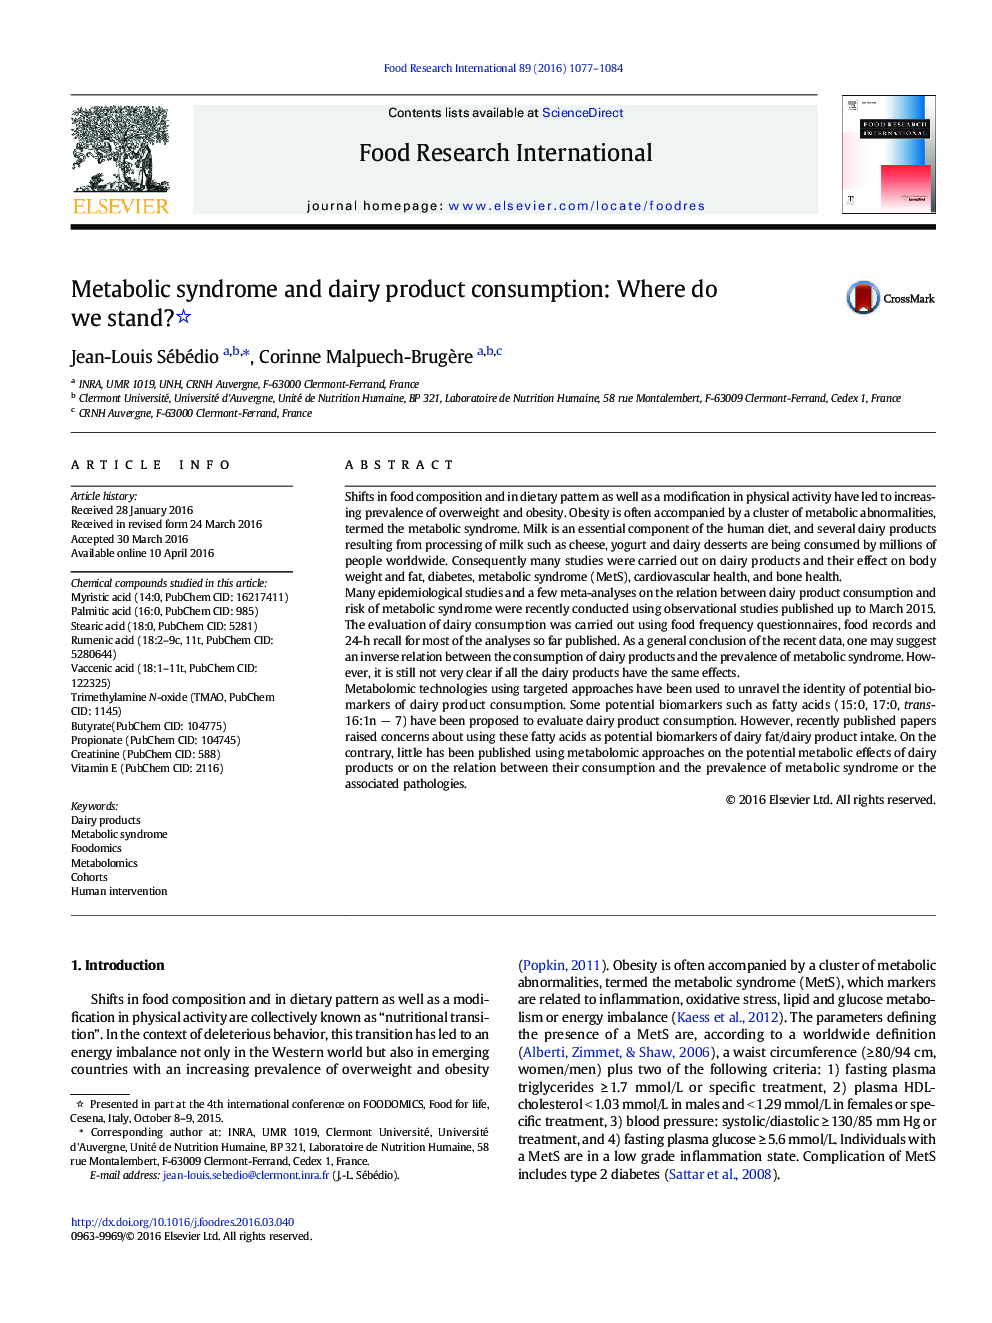 Metabolic syndrome and dairy product consumption: Where do we stand?